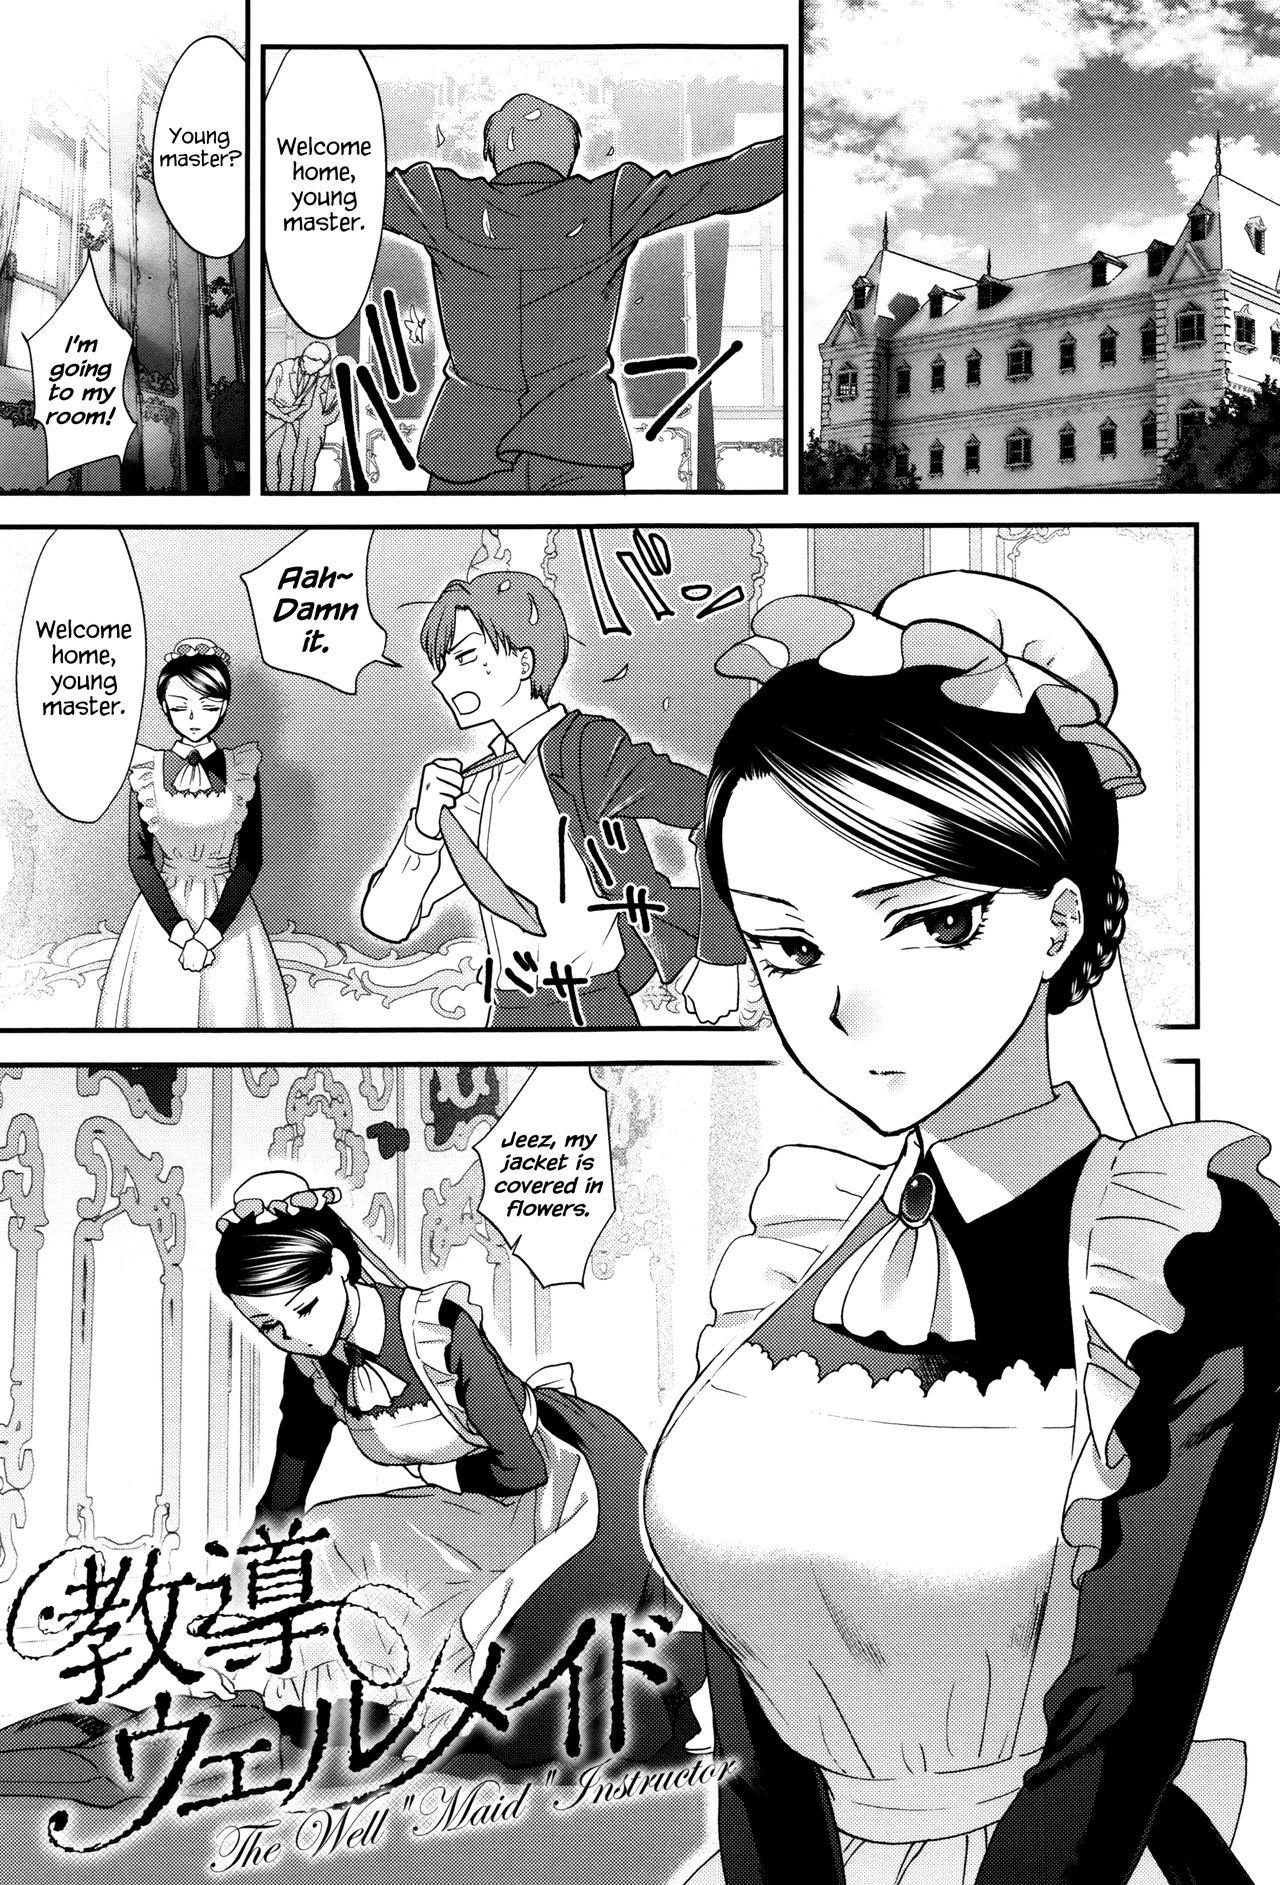 Kyoudou Well Maid - The Well “Maid” Instructor 0